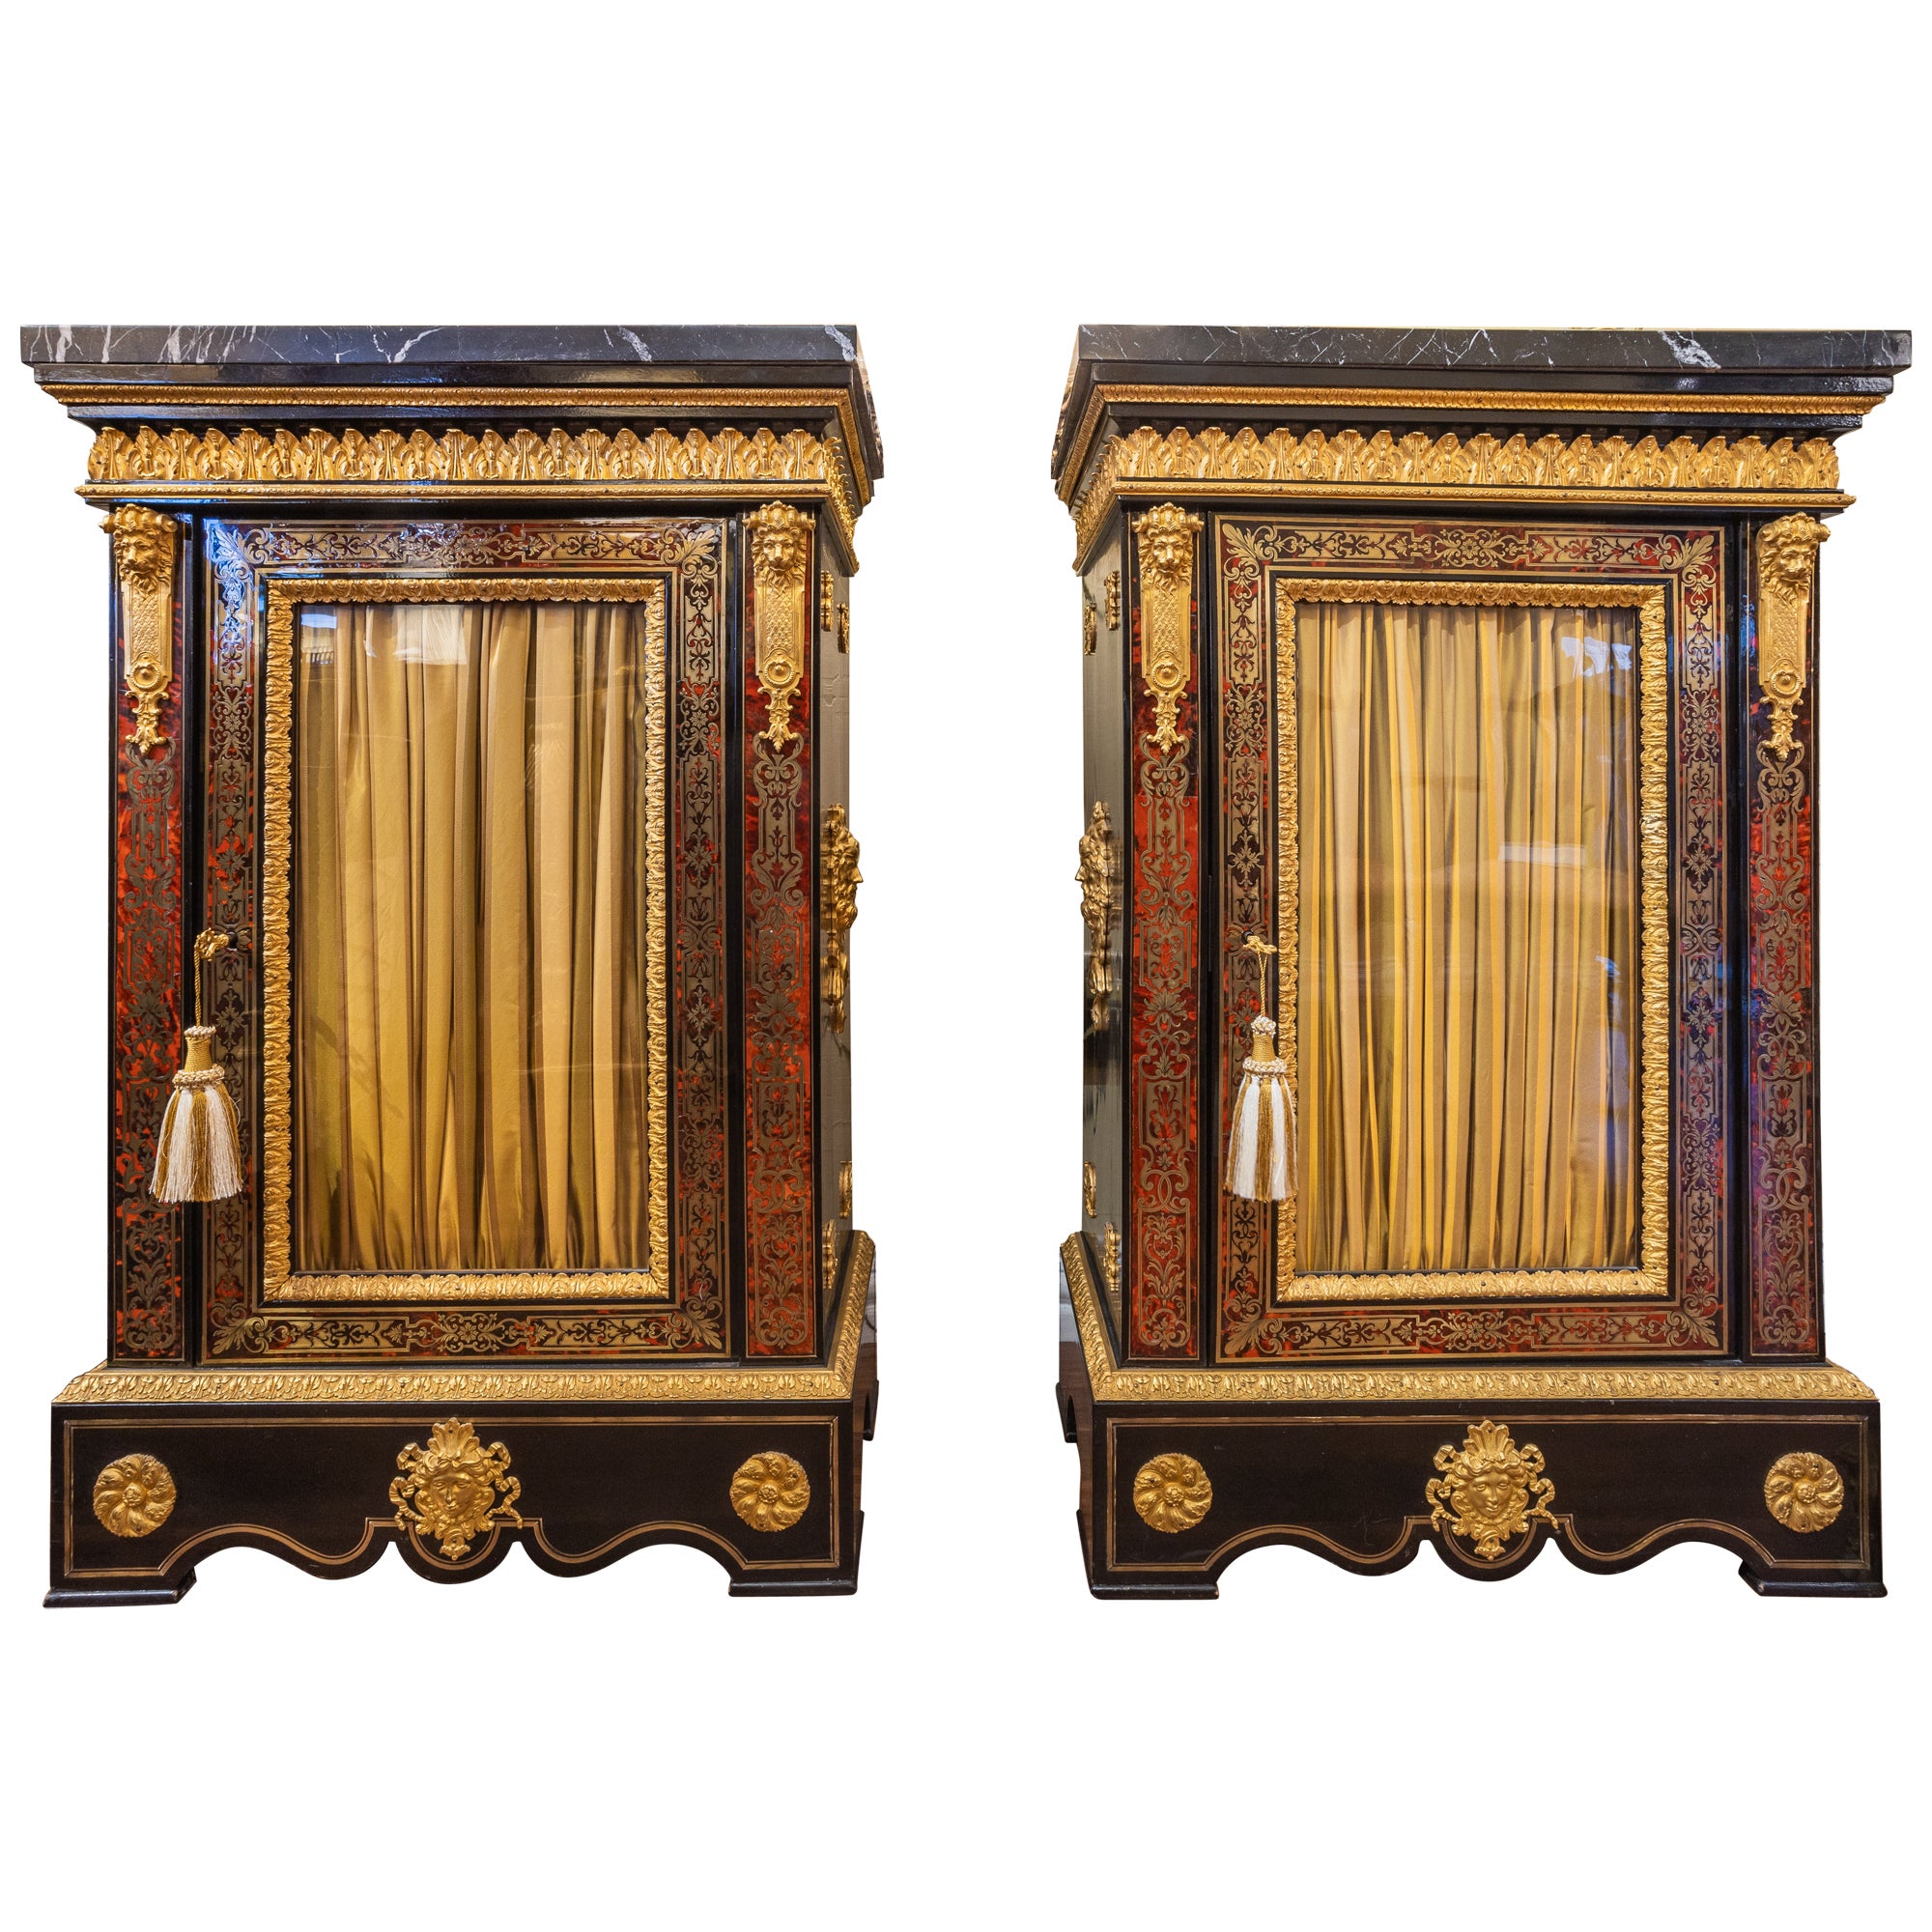 A fine pair of French Boulle and gilt bronze mounted cabinets. Black marble tops For Sale